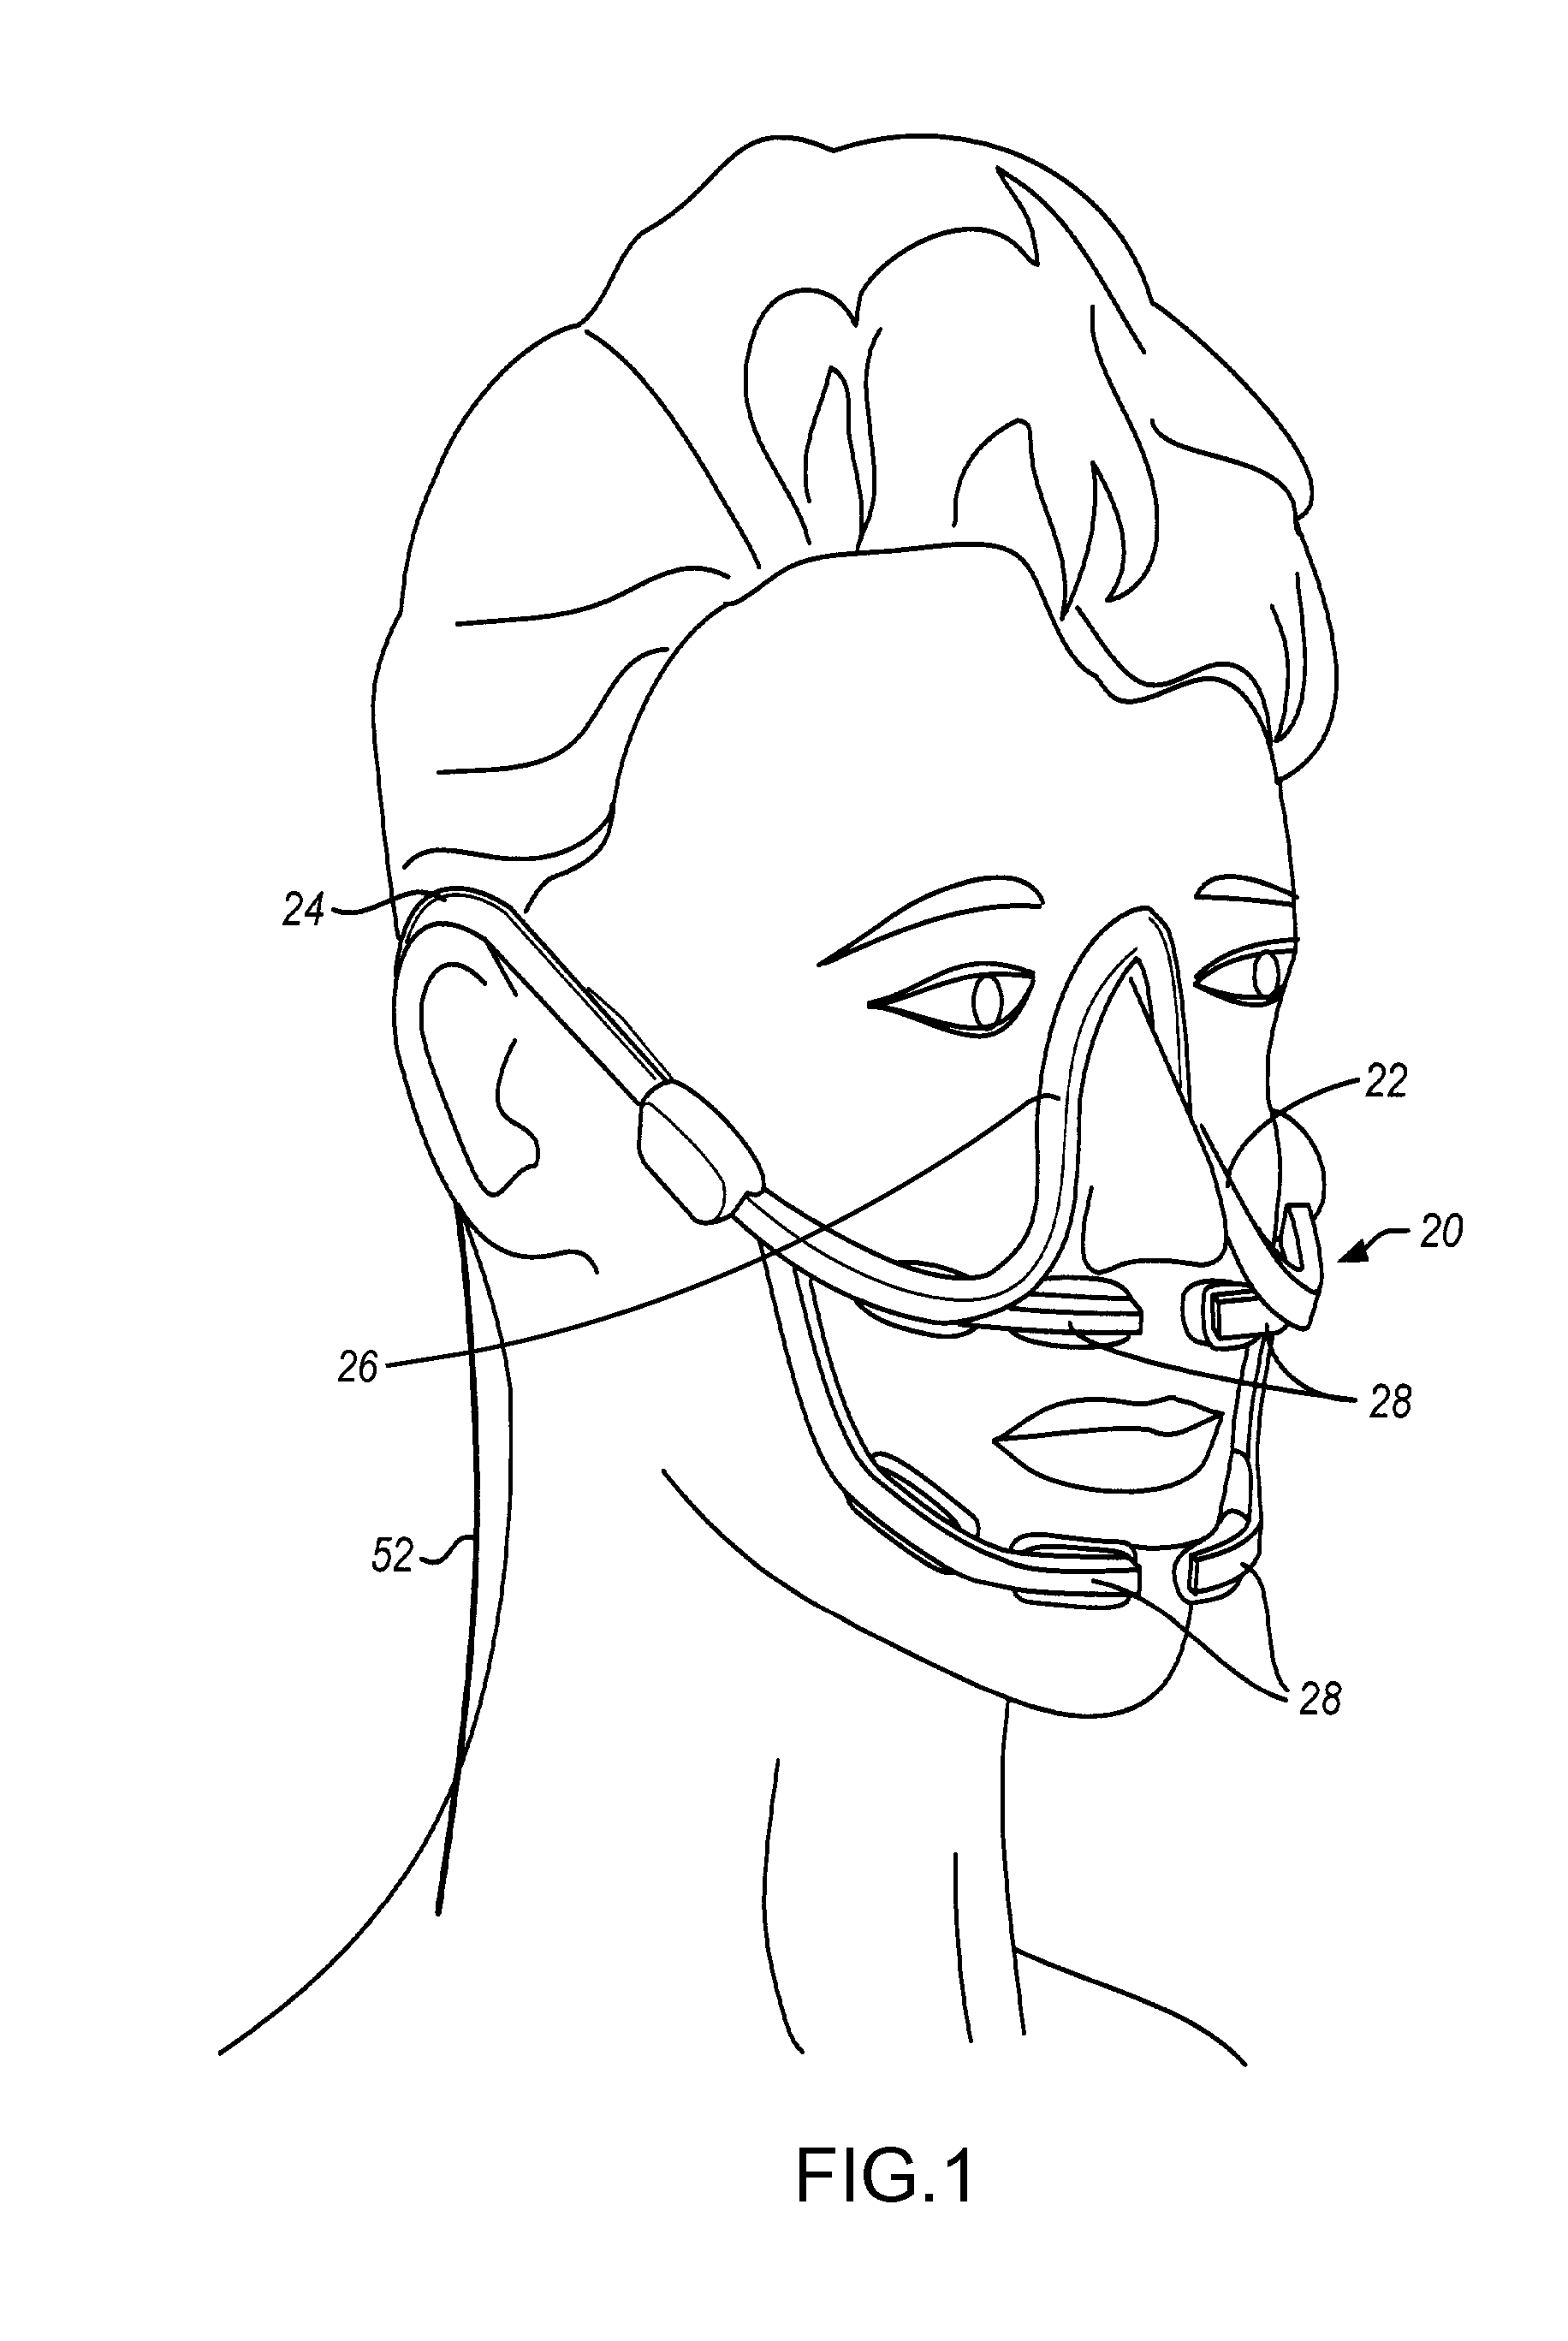 Methods and apparatuses useful for regulating bone remodeling or tooth movement using light therapy, a functional appliance, and/or vitamin d